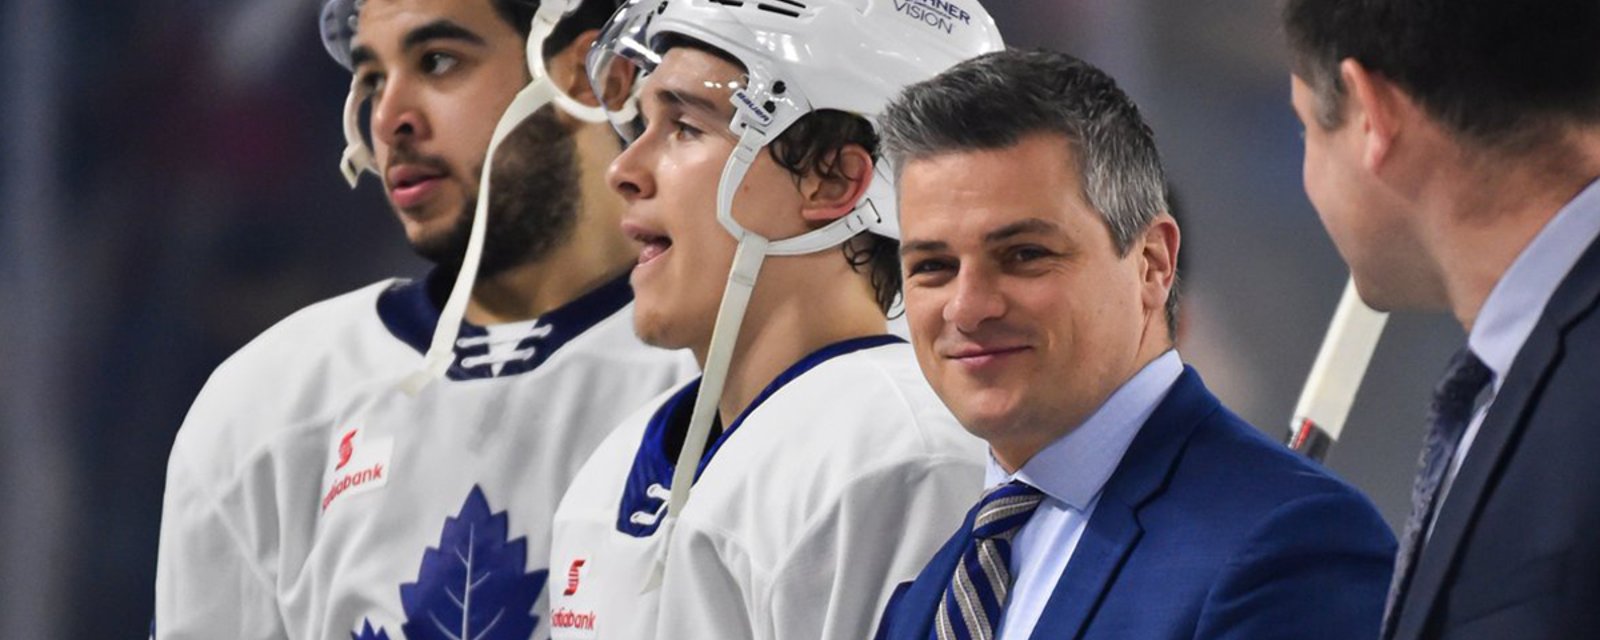 Breaking: Leafs finally make a move with AHL coach Sheldon Keefe